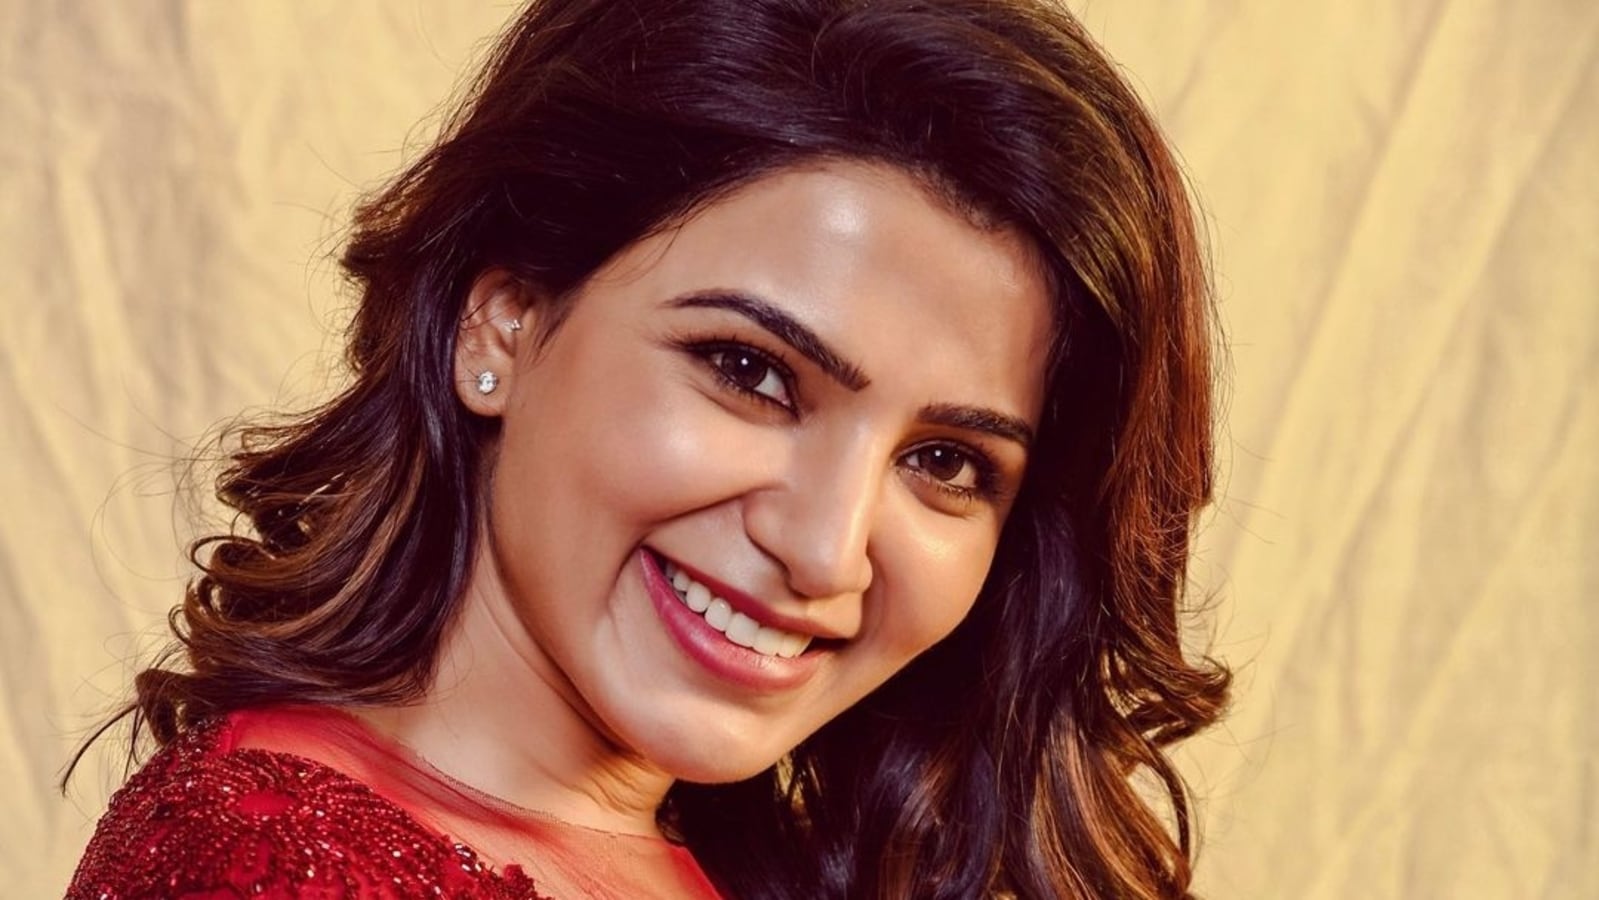 Samantha Ruth Prabhu shares post about letting go and acceptance, two months after split with Naga Chaitanya - Hindustan Times